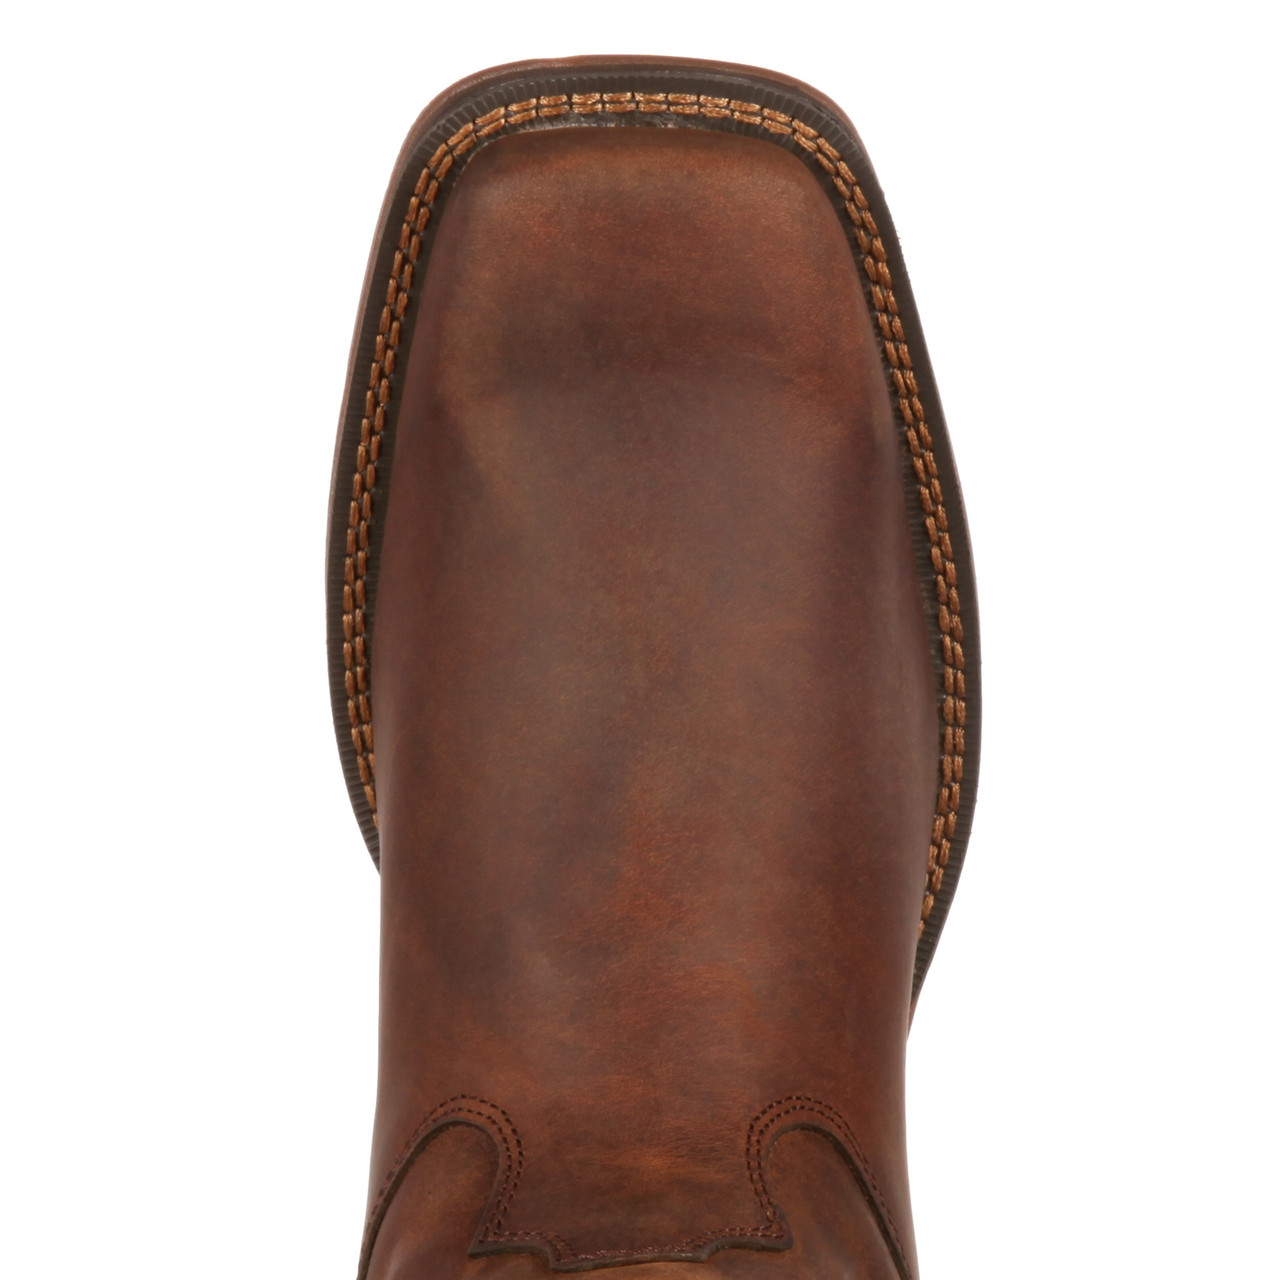 REBEL BY DURANGO BROWN PULL-ON WESTERN BOOTS DB5444